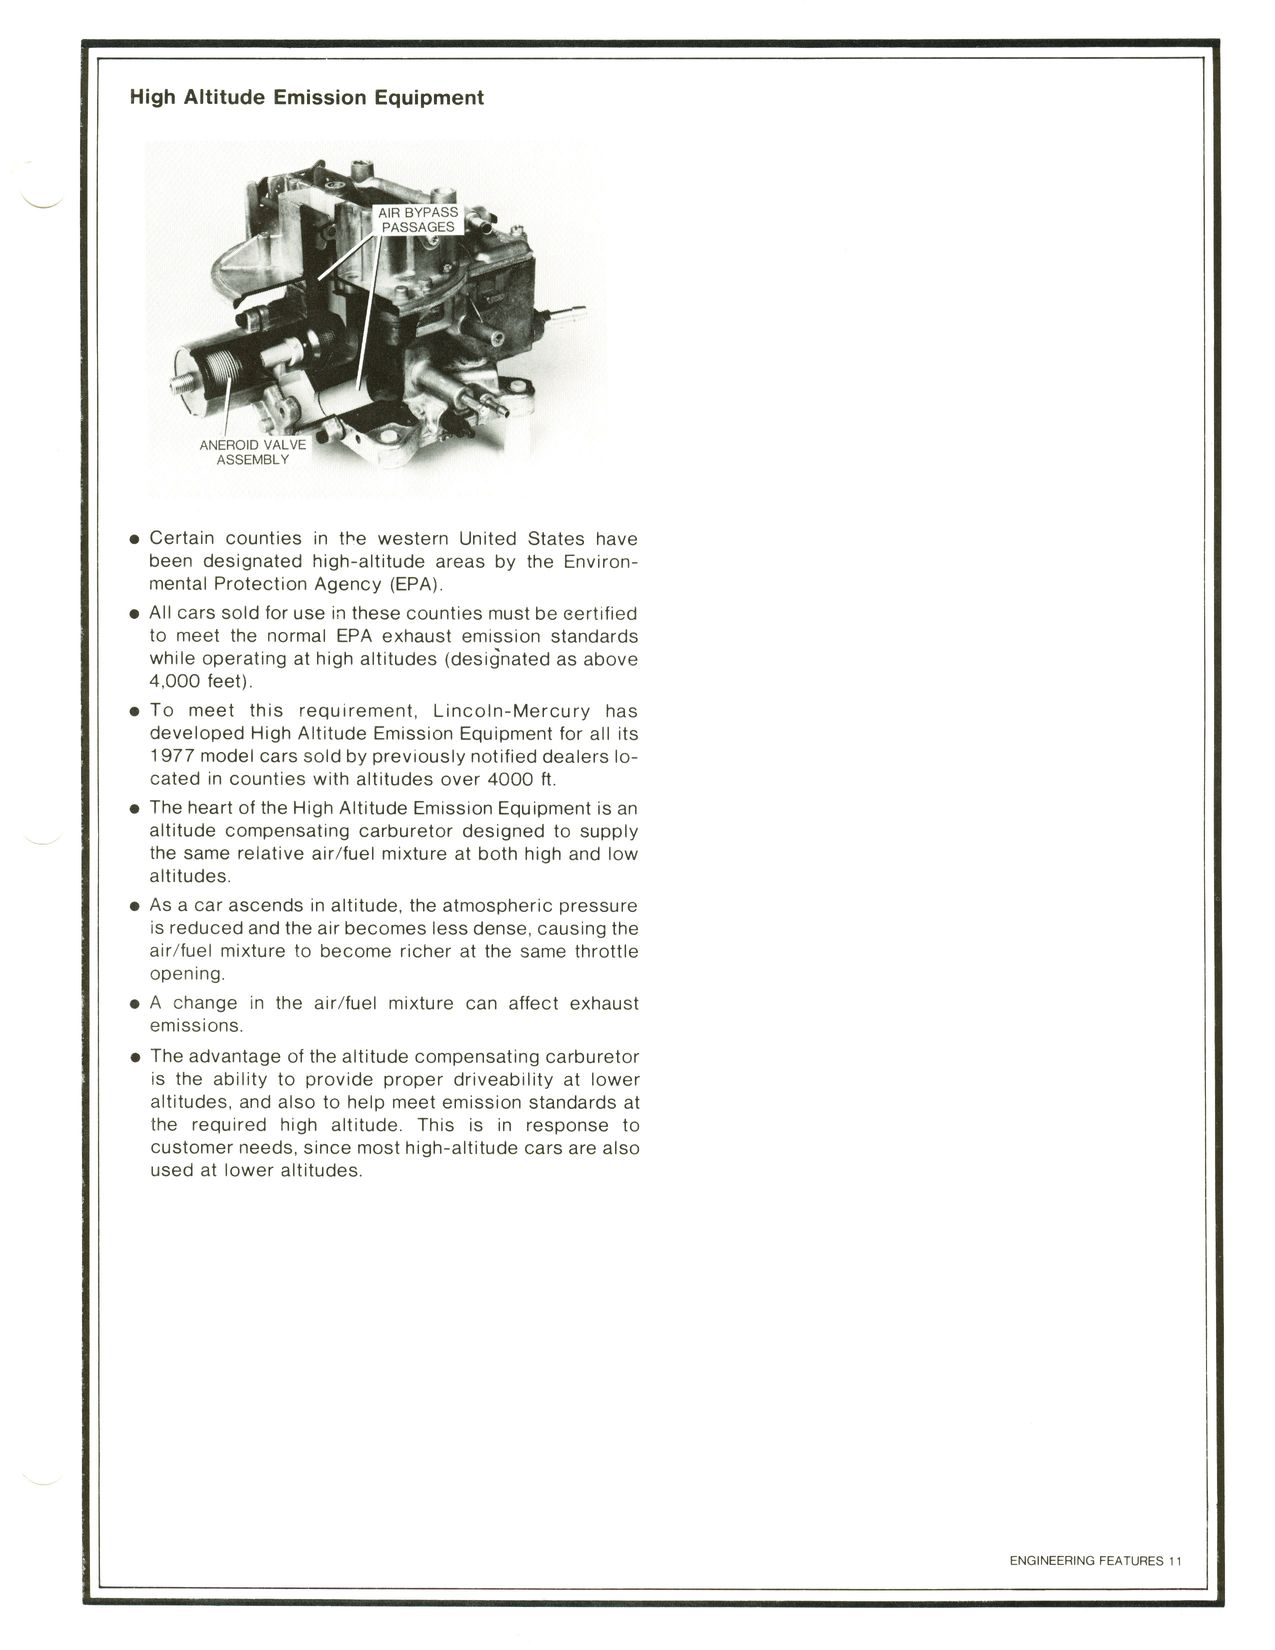 1977 Continental Product Facts Book-3-11